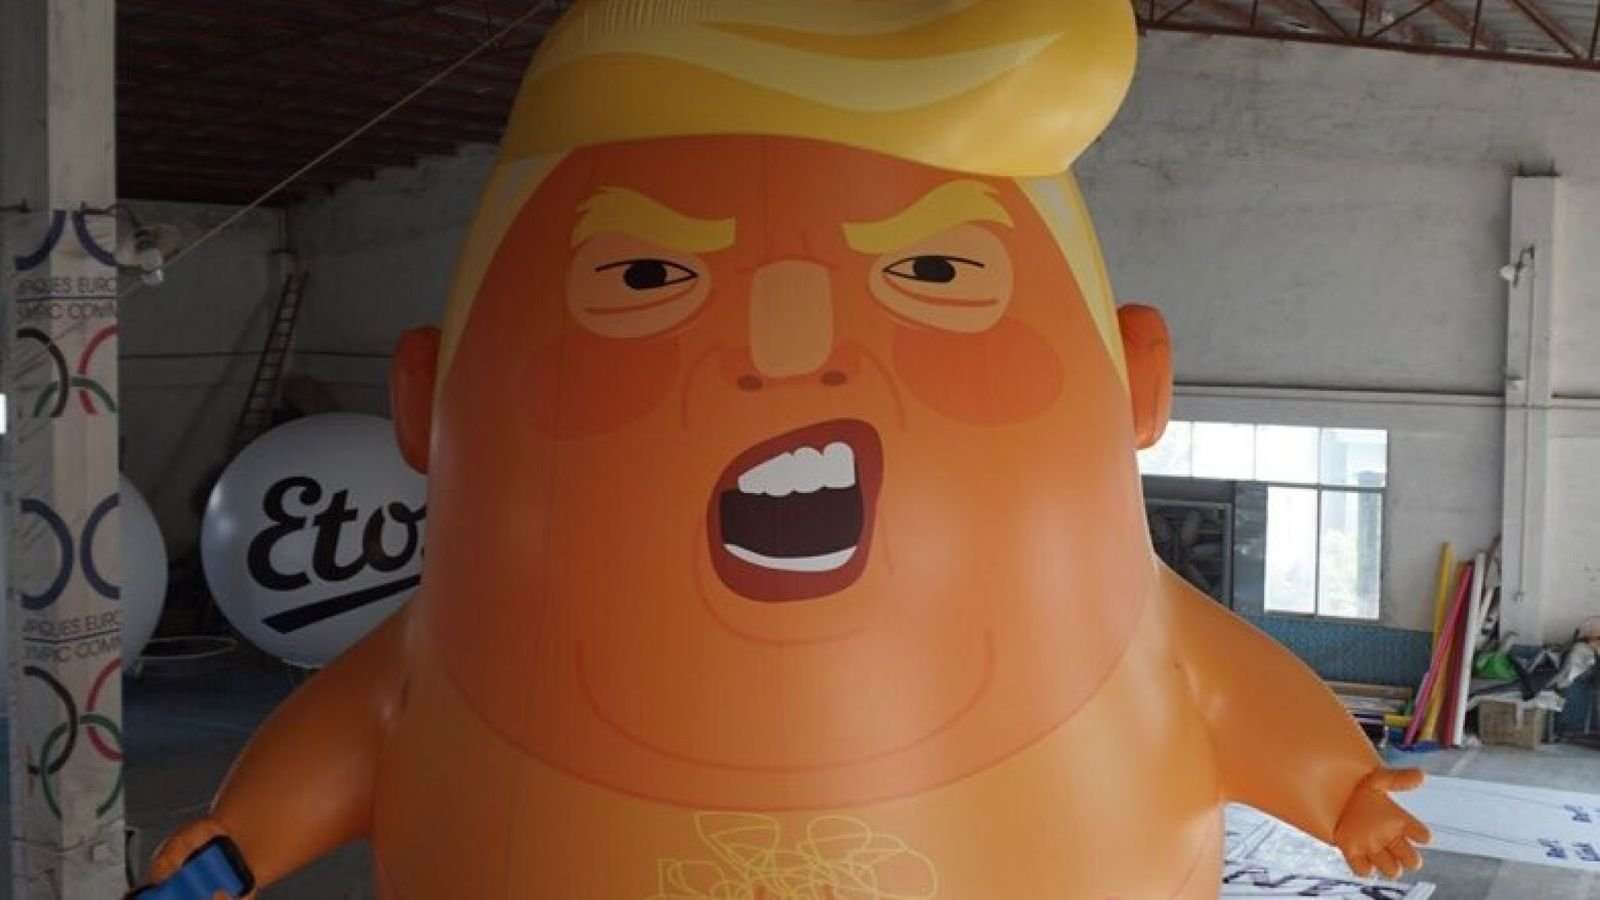 image for Trump 'angry baby' blimp gets green light to fly over London during president's visit